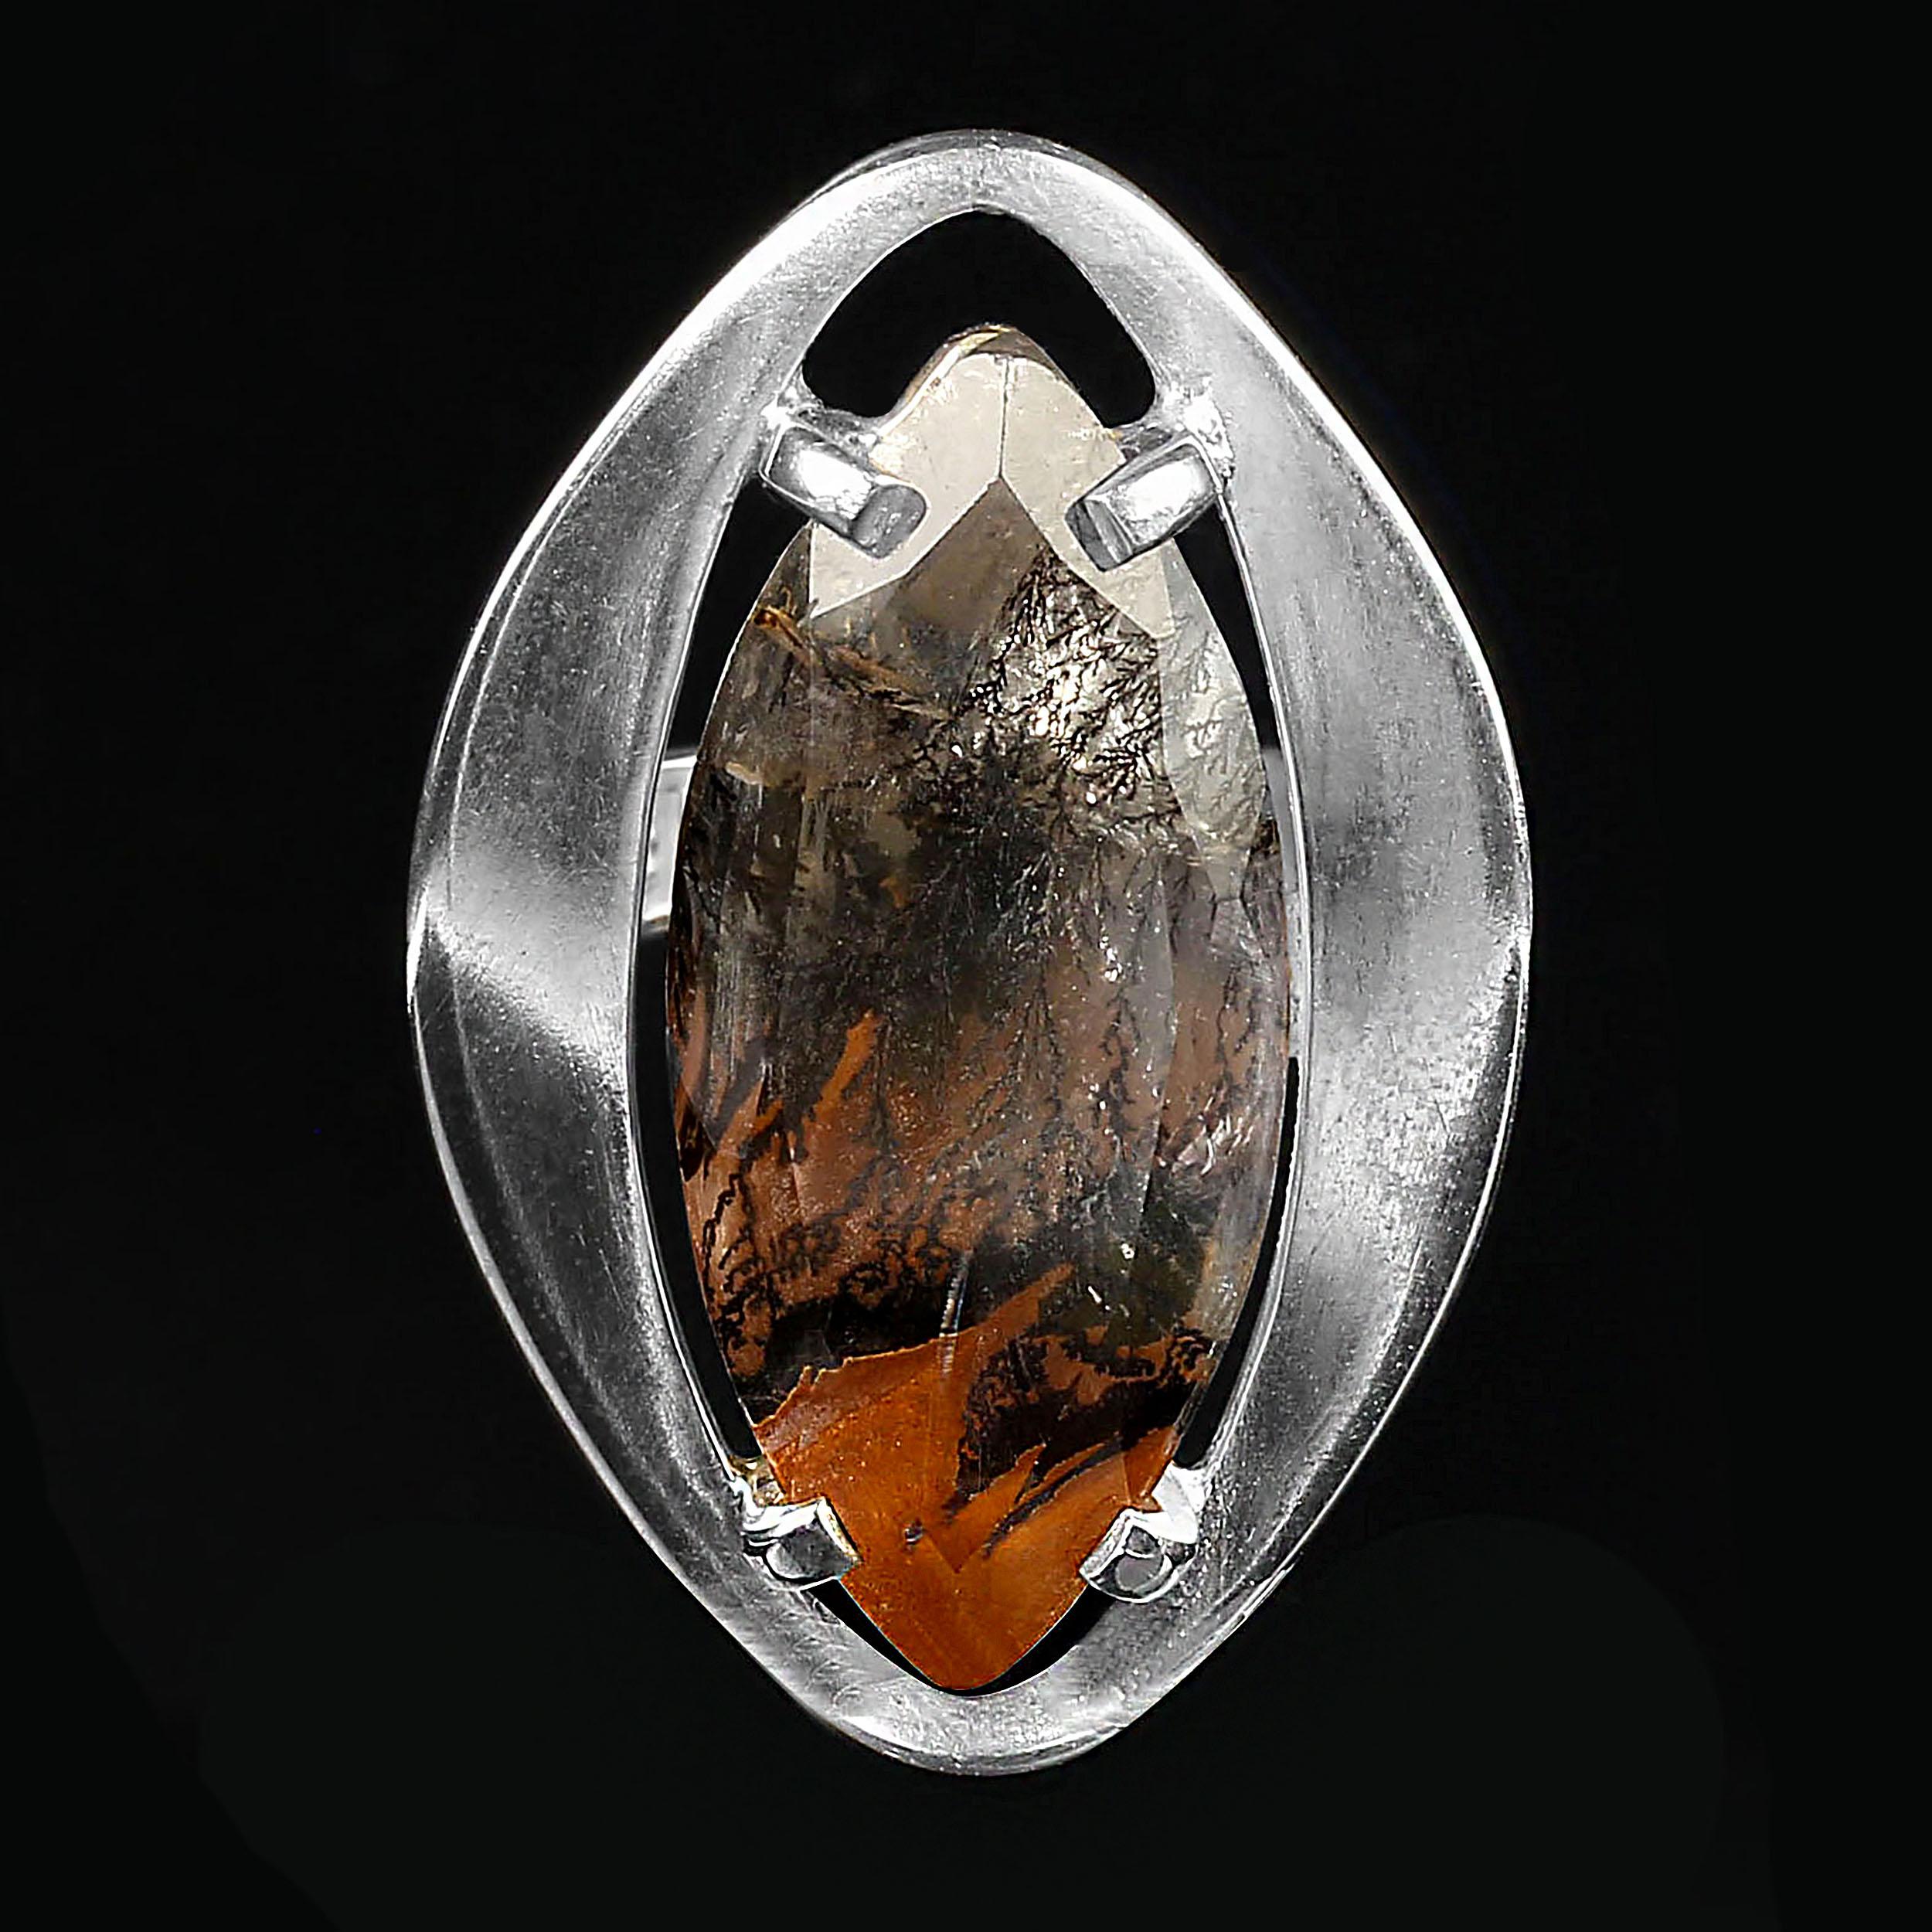 Dramatic Dendritic Quartz ring with orange and black features.  This unusual marquise shaped gemstone is approximately 13 carats. This one-of-a-kind gemstone is set in a custom-made sterling silver ring perfectly created to best display the